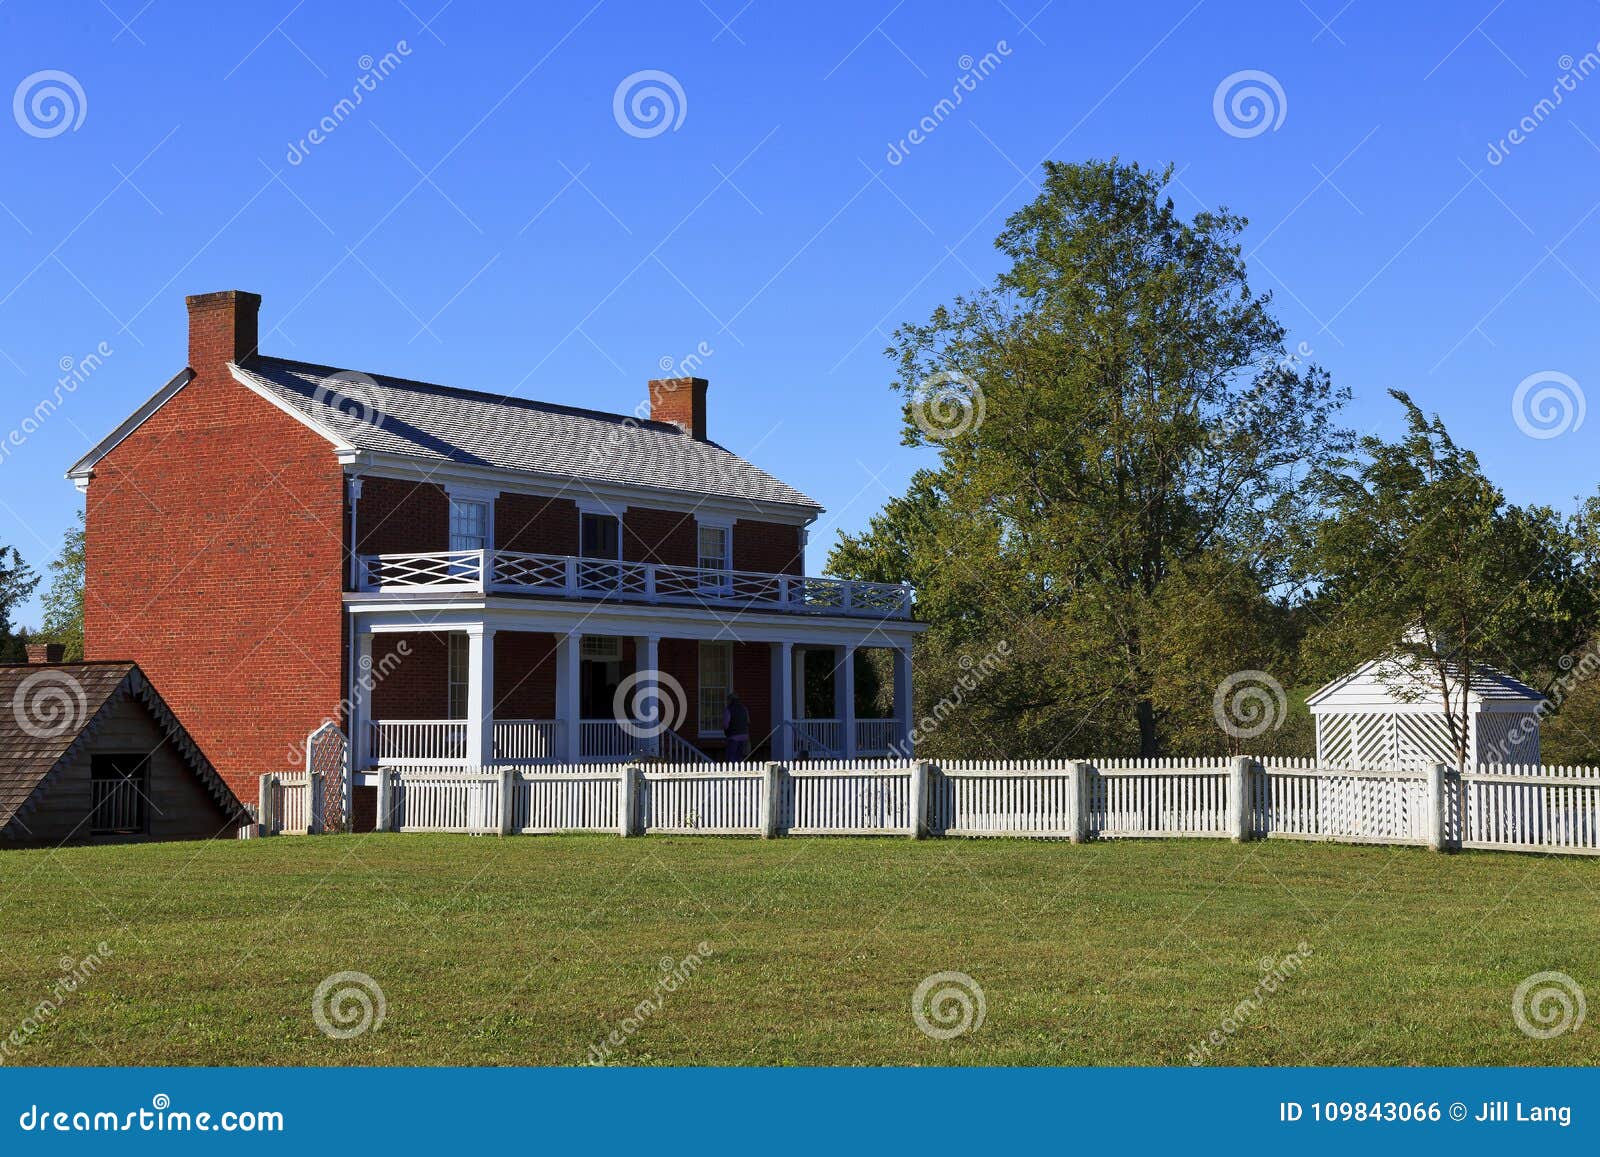 McLean House At Appomattox Court House National Park Stock Photo ...